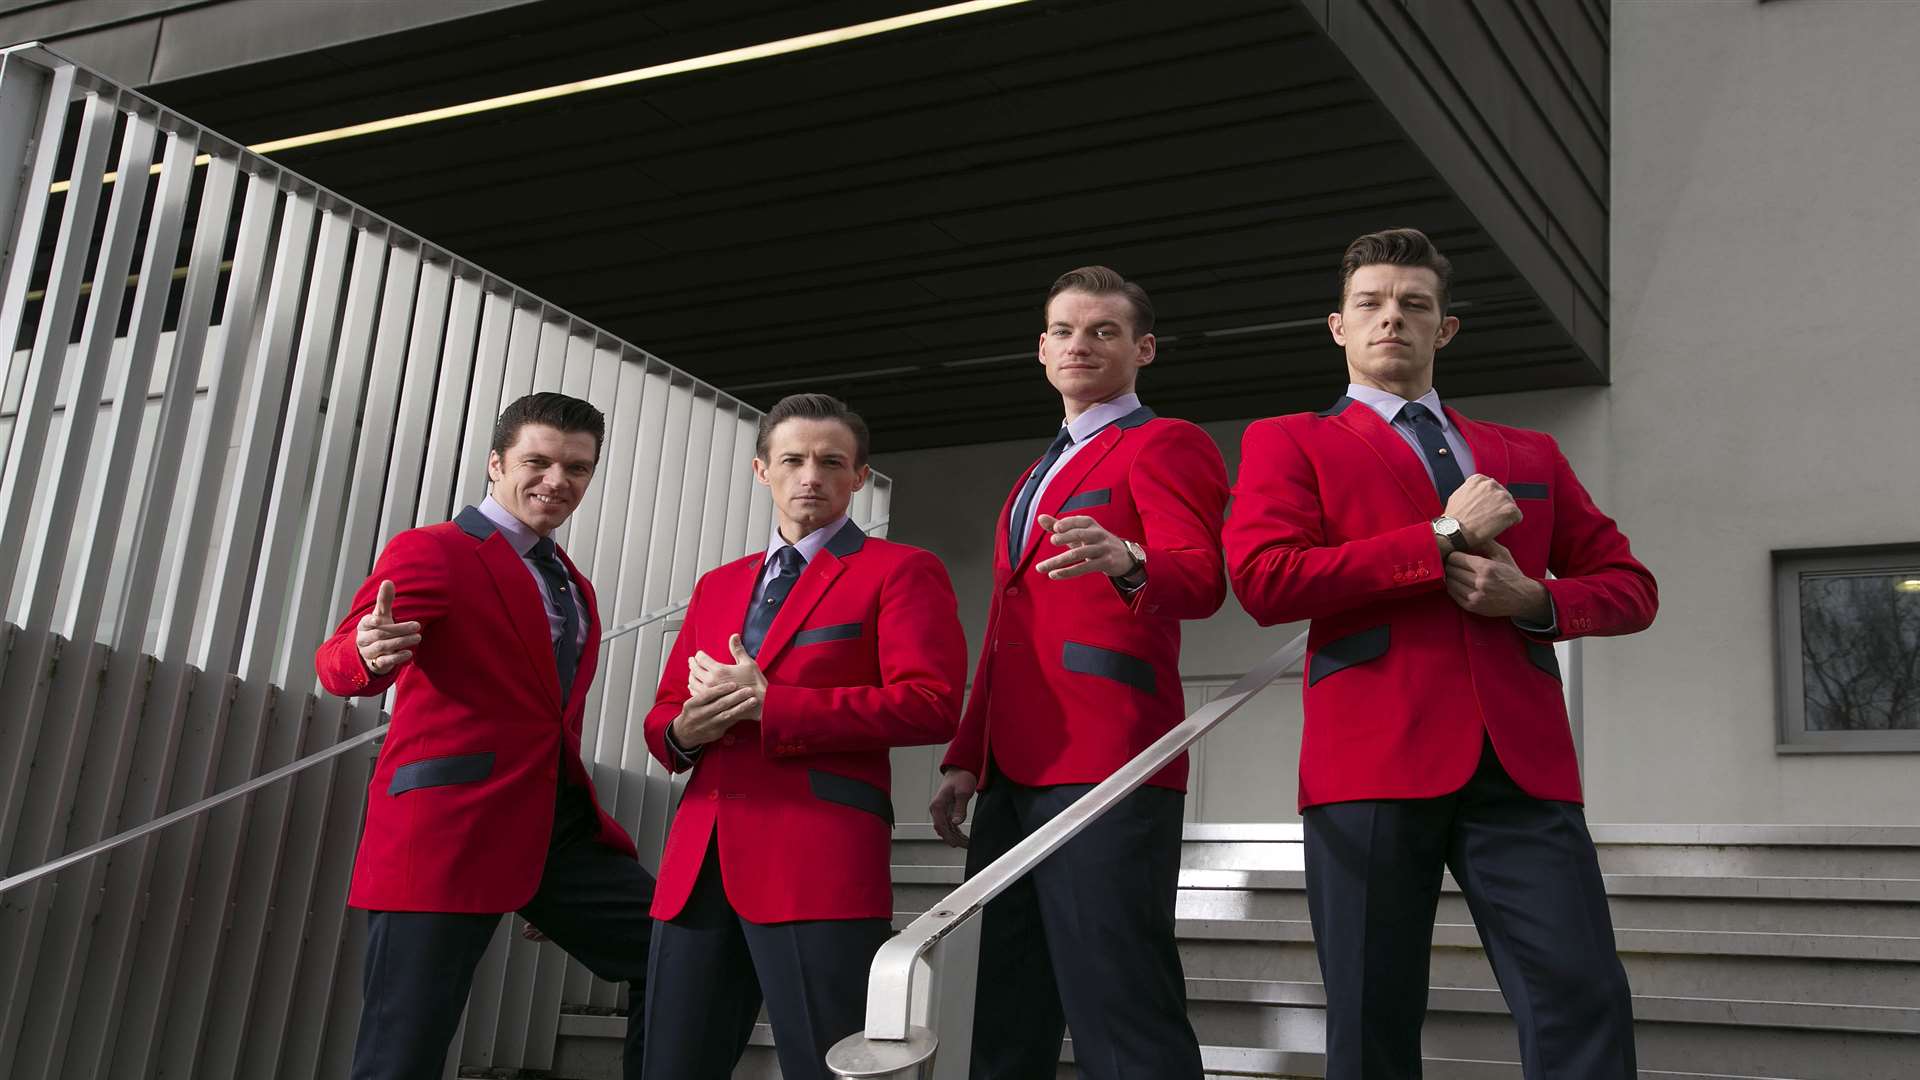 Jersey Boys cast Stephen Webb as Tommy DeVito, Tim Driesen as Frankie Valli, Sam Ferriday as Bob Gaudio and Lewis Griffiths as Nick Massi